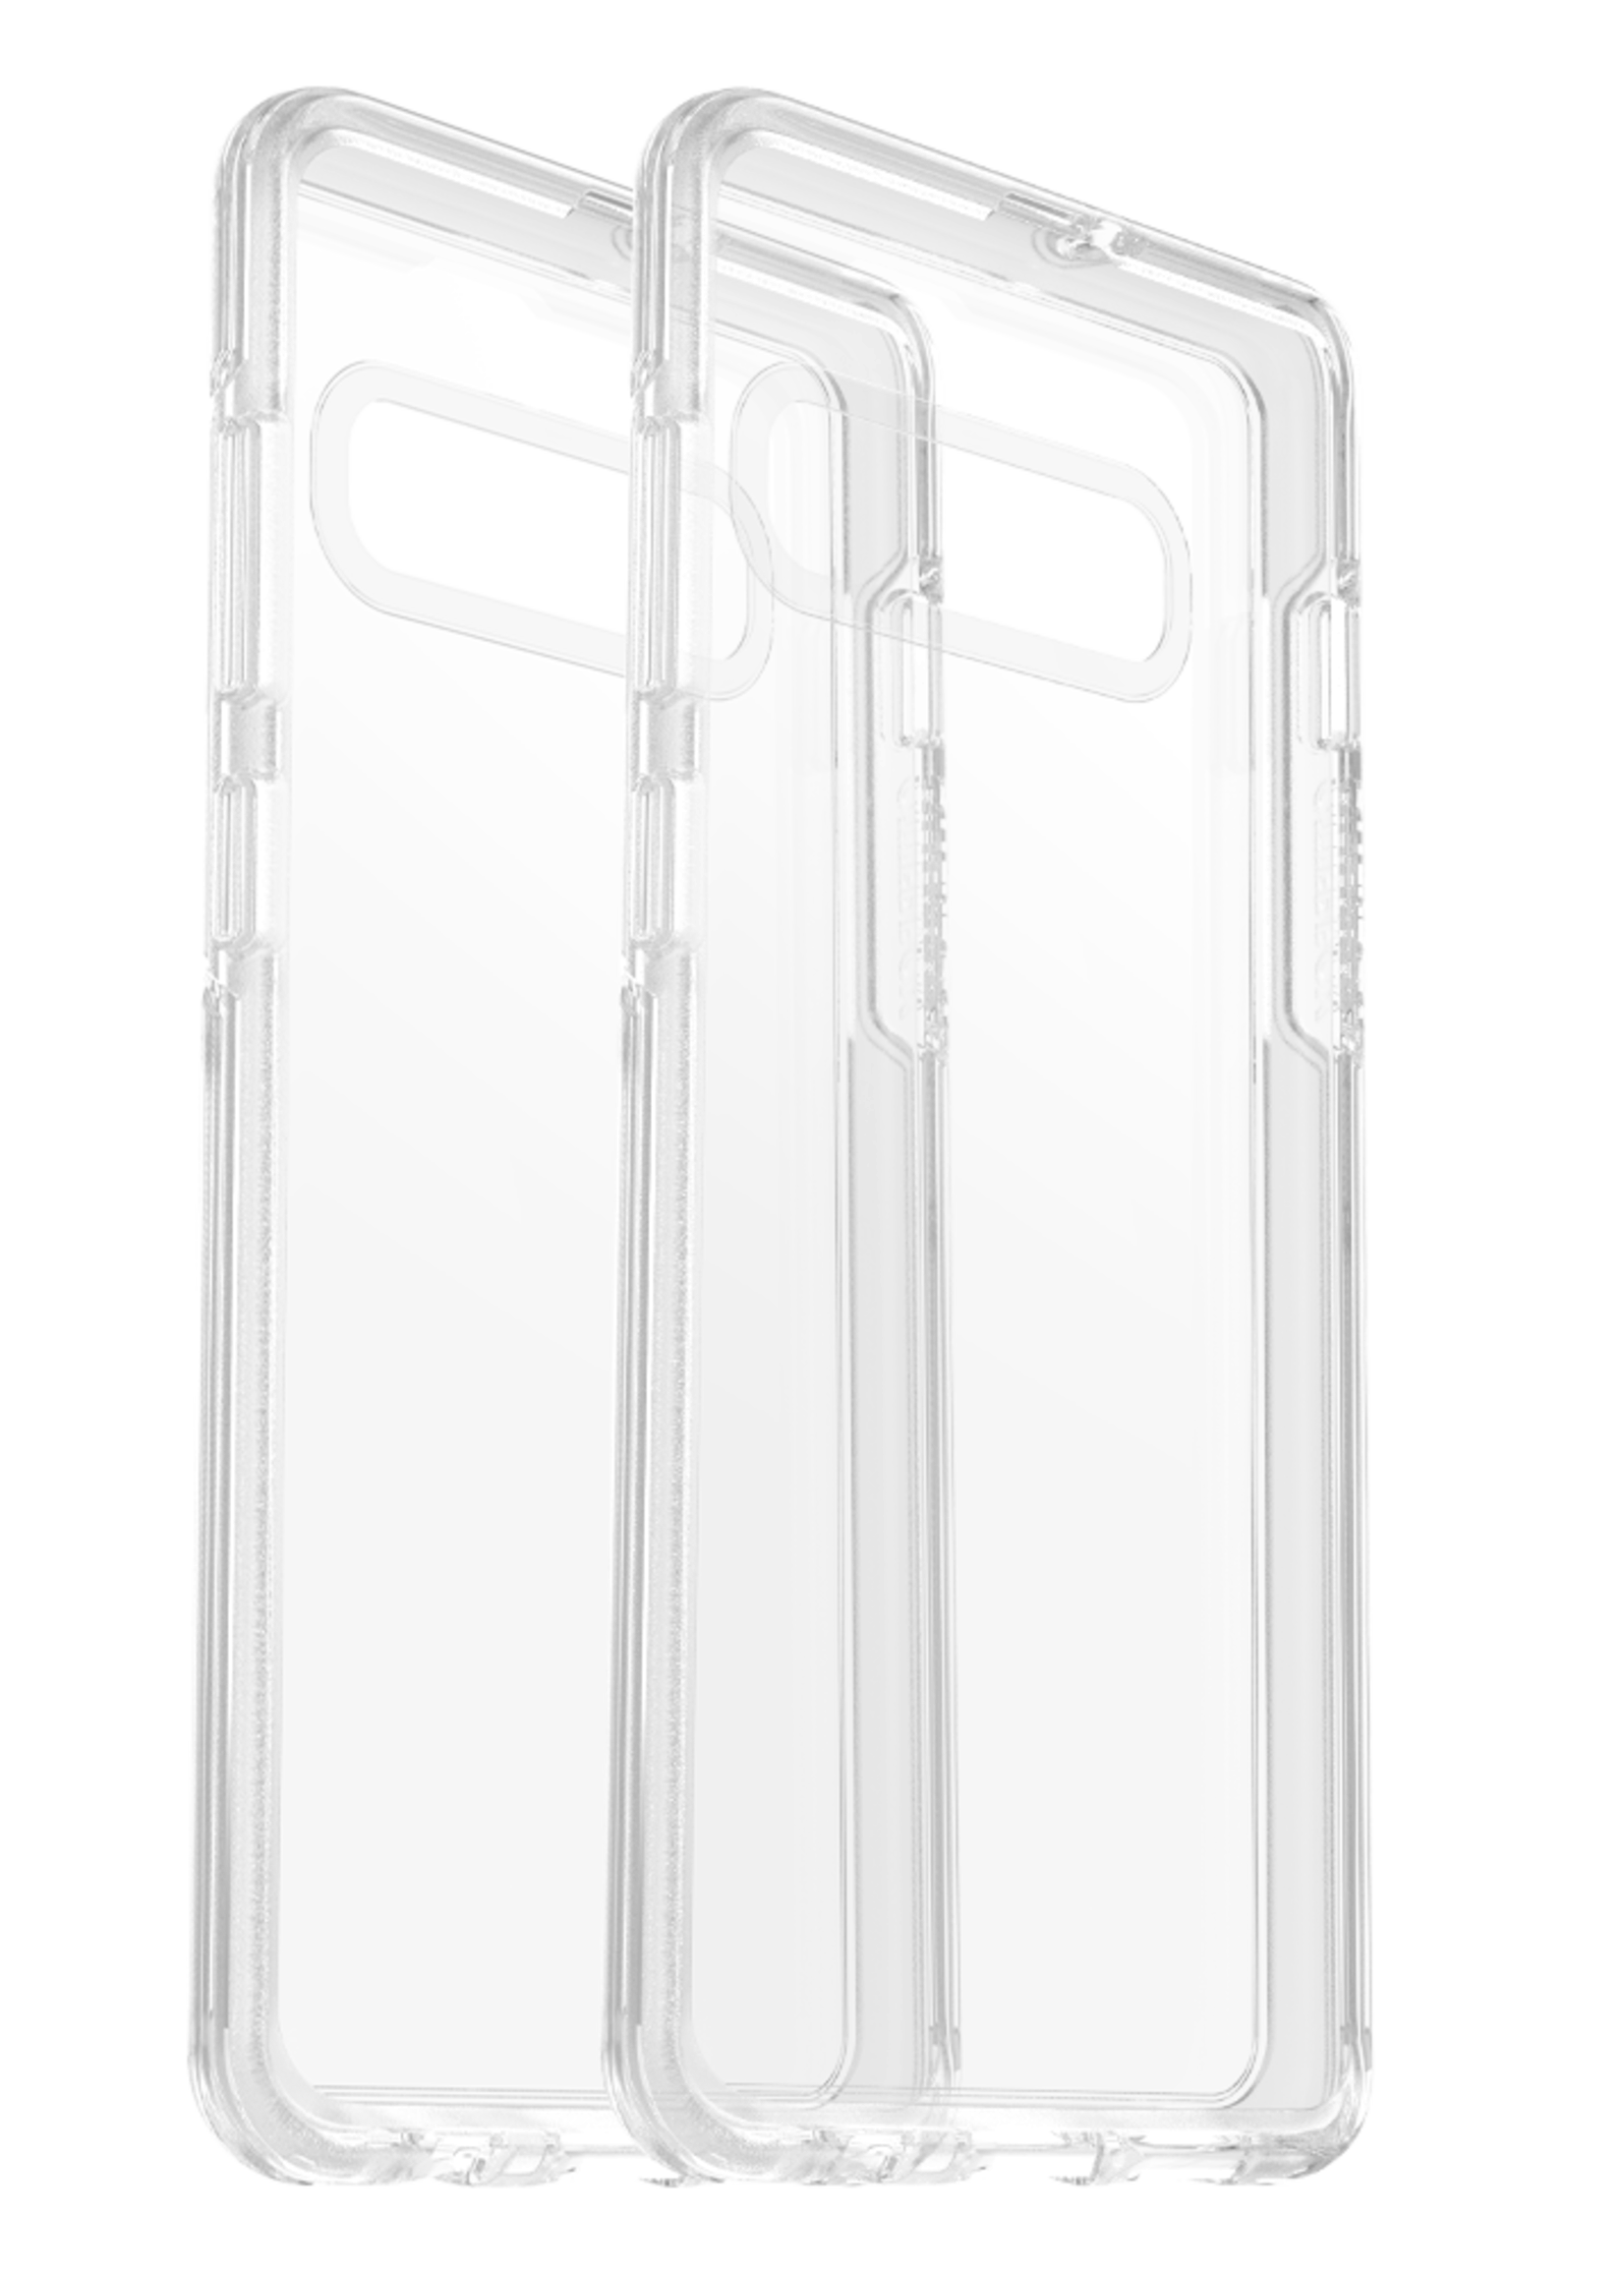 Otterbox OtterBox - Symmetry Clear Case for Samsung Galaxy S10 Plus - Clear